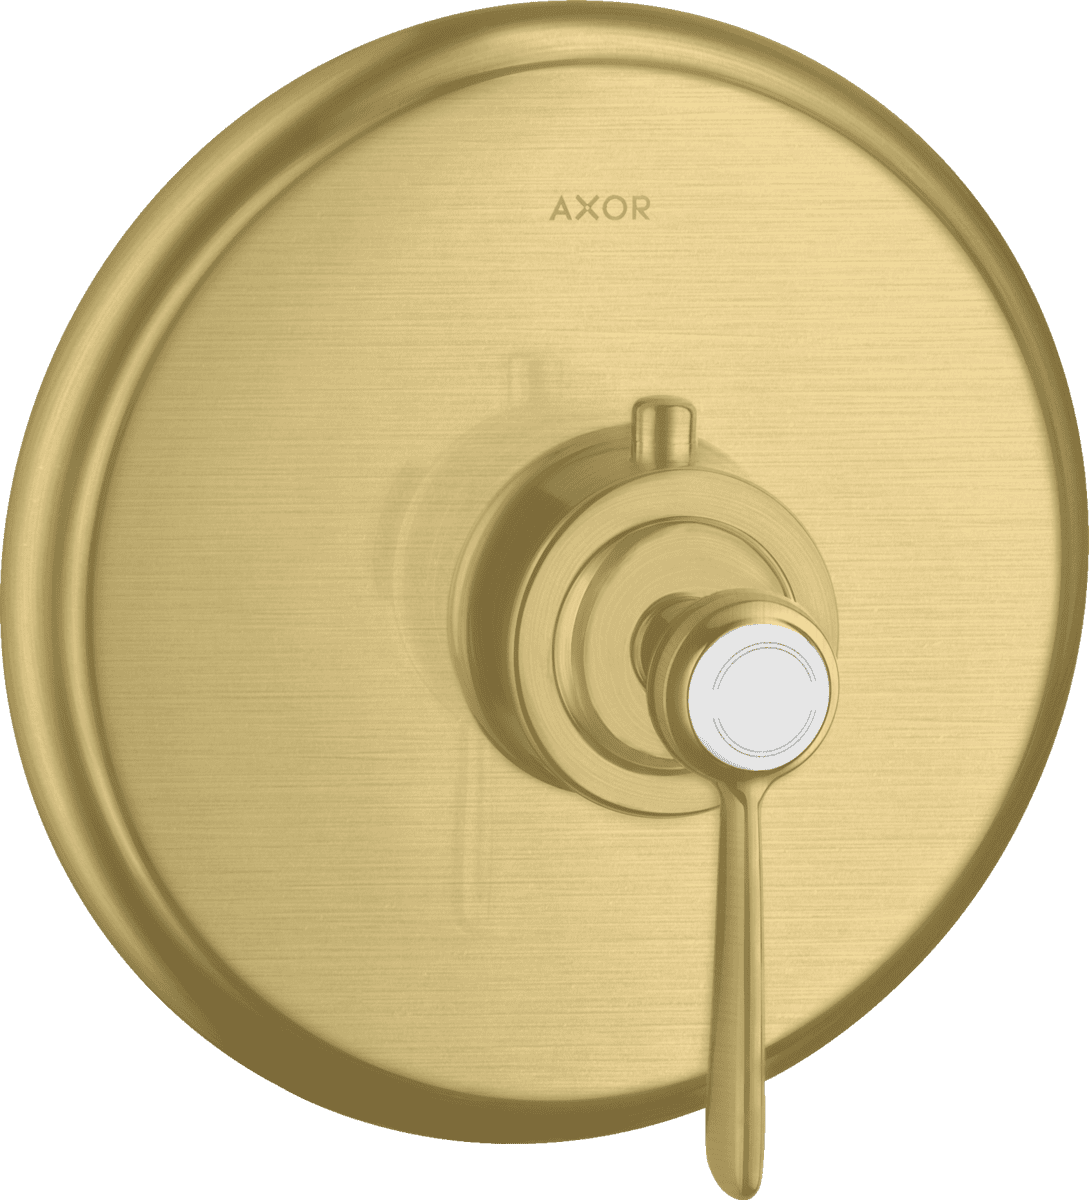 Picture of HANSGROHE AXOR Montreux Thermostat HighFlow for concealed installation with lever handle #16824950 - Brushed Brass